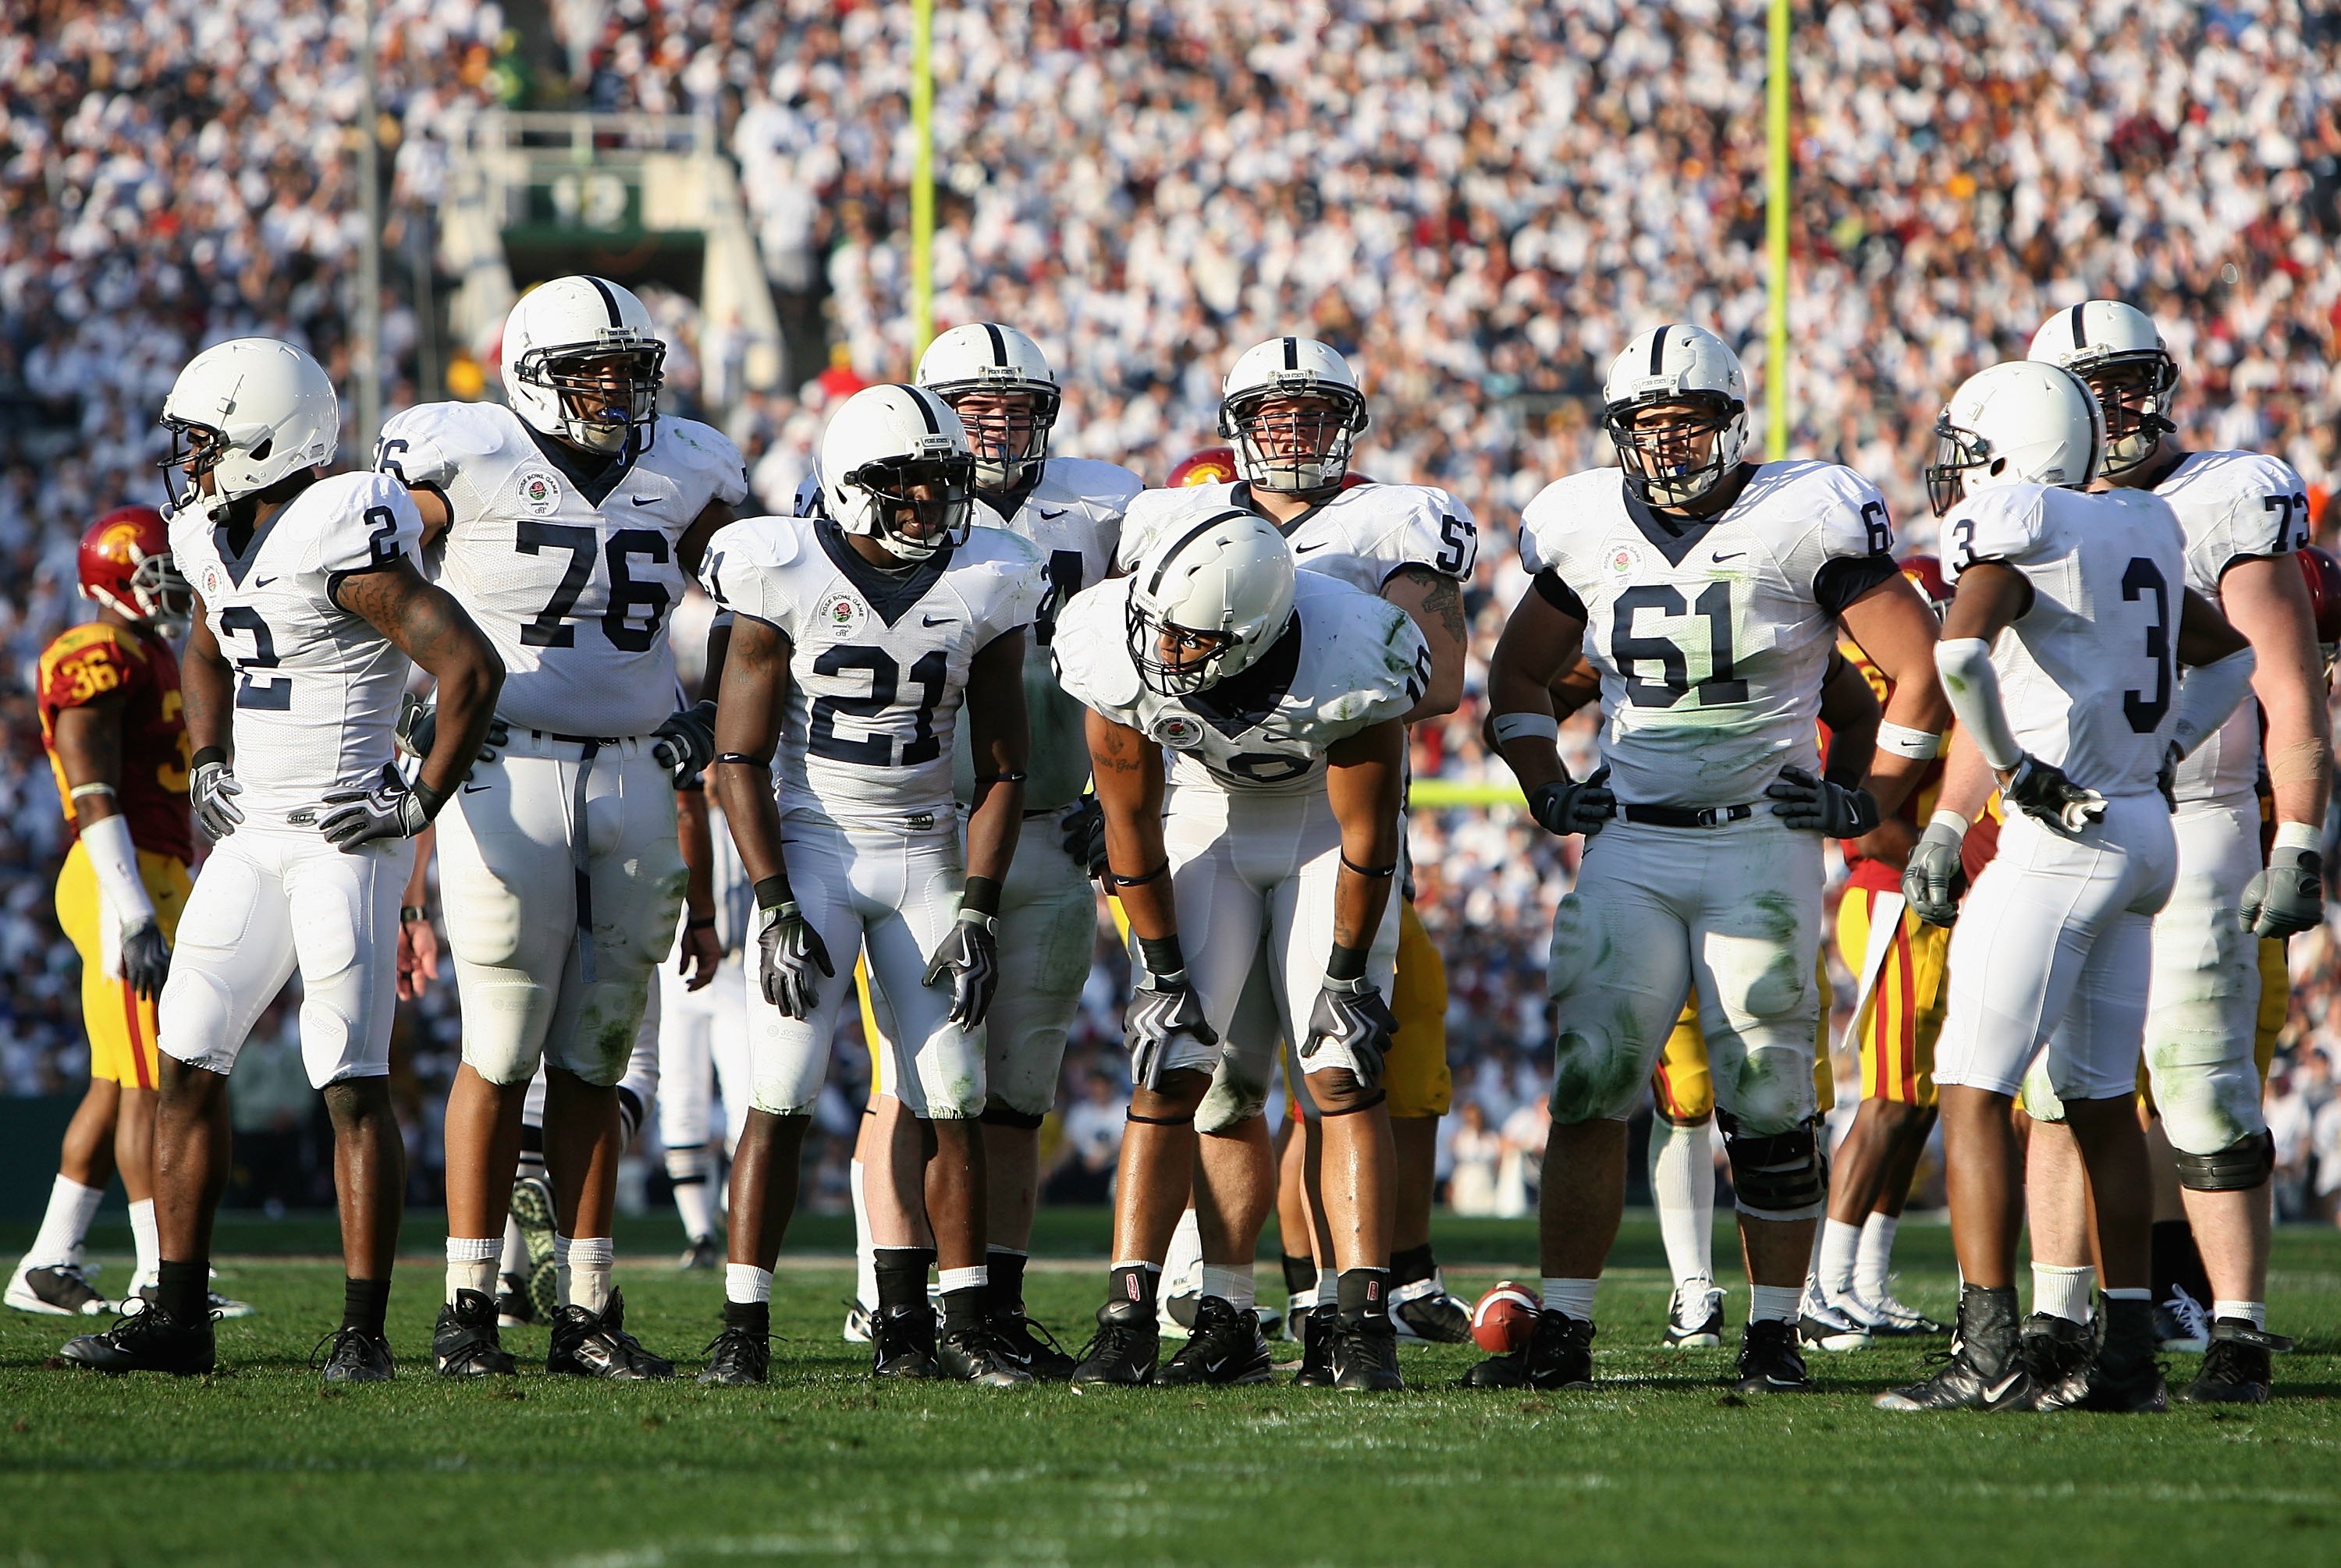 PASADENA, CA - JANUARY 01:  The Penn State Nittany Lions huddle up during the 95th Rose Bowl Game presented by Citi against the USC Trojans at the Rose Bowl on January 1, 2009 in Pasadena, California.  (Photo by Christian Petersen/Getty Images)